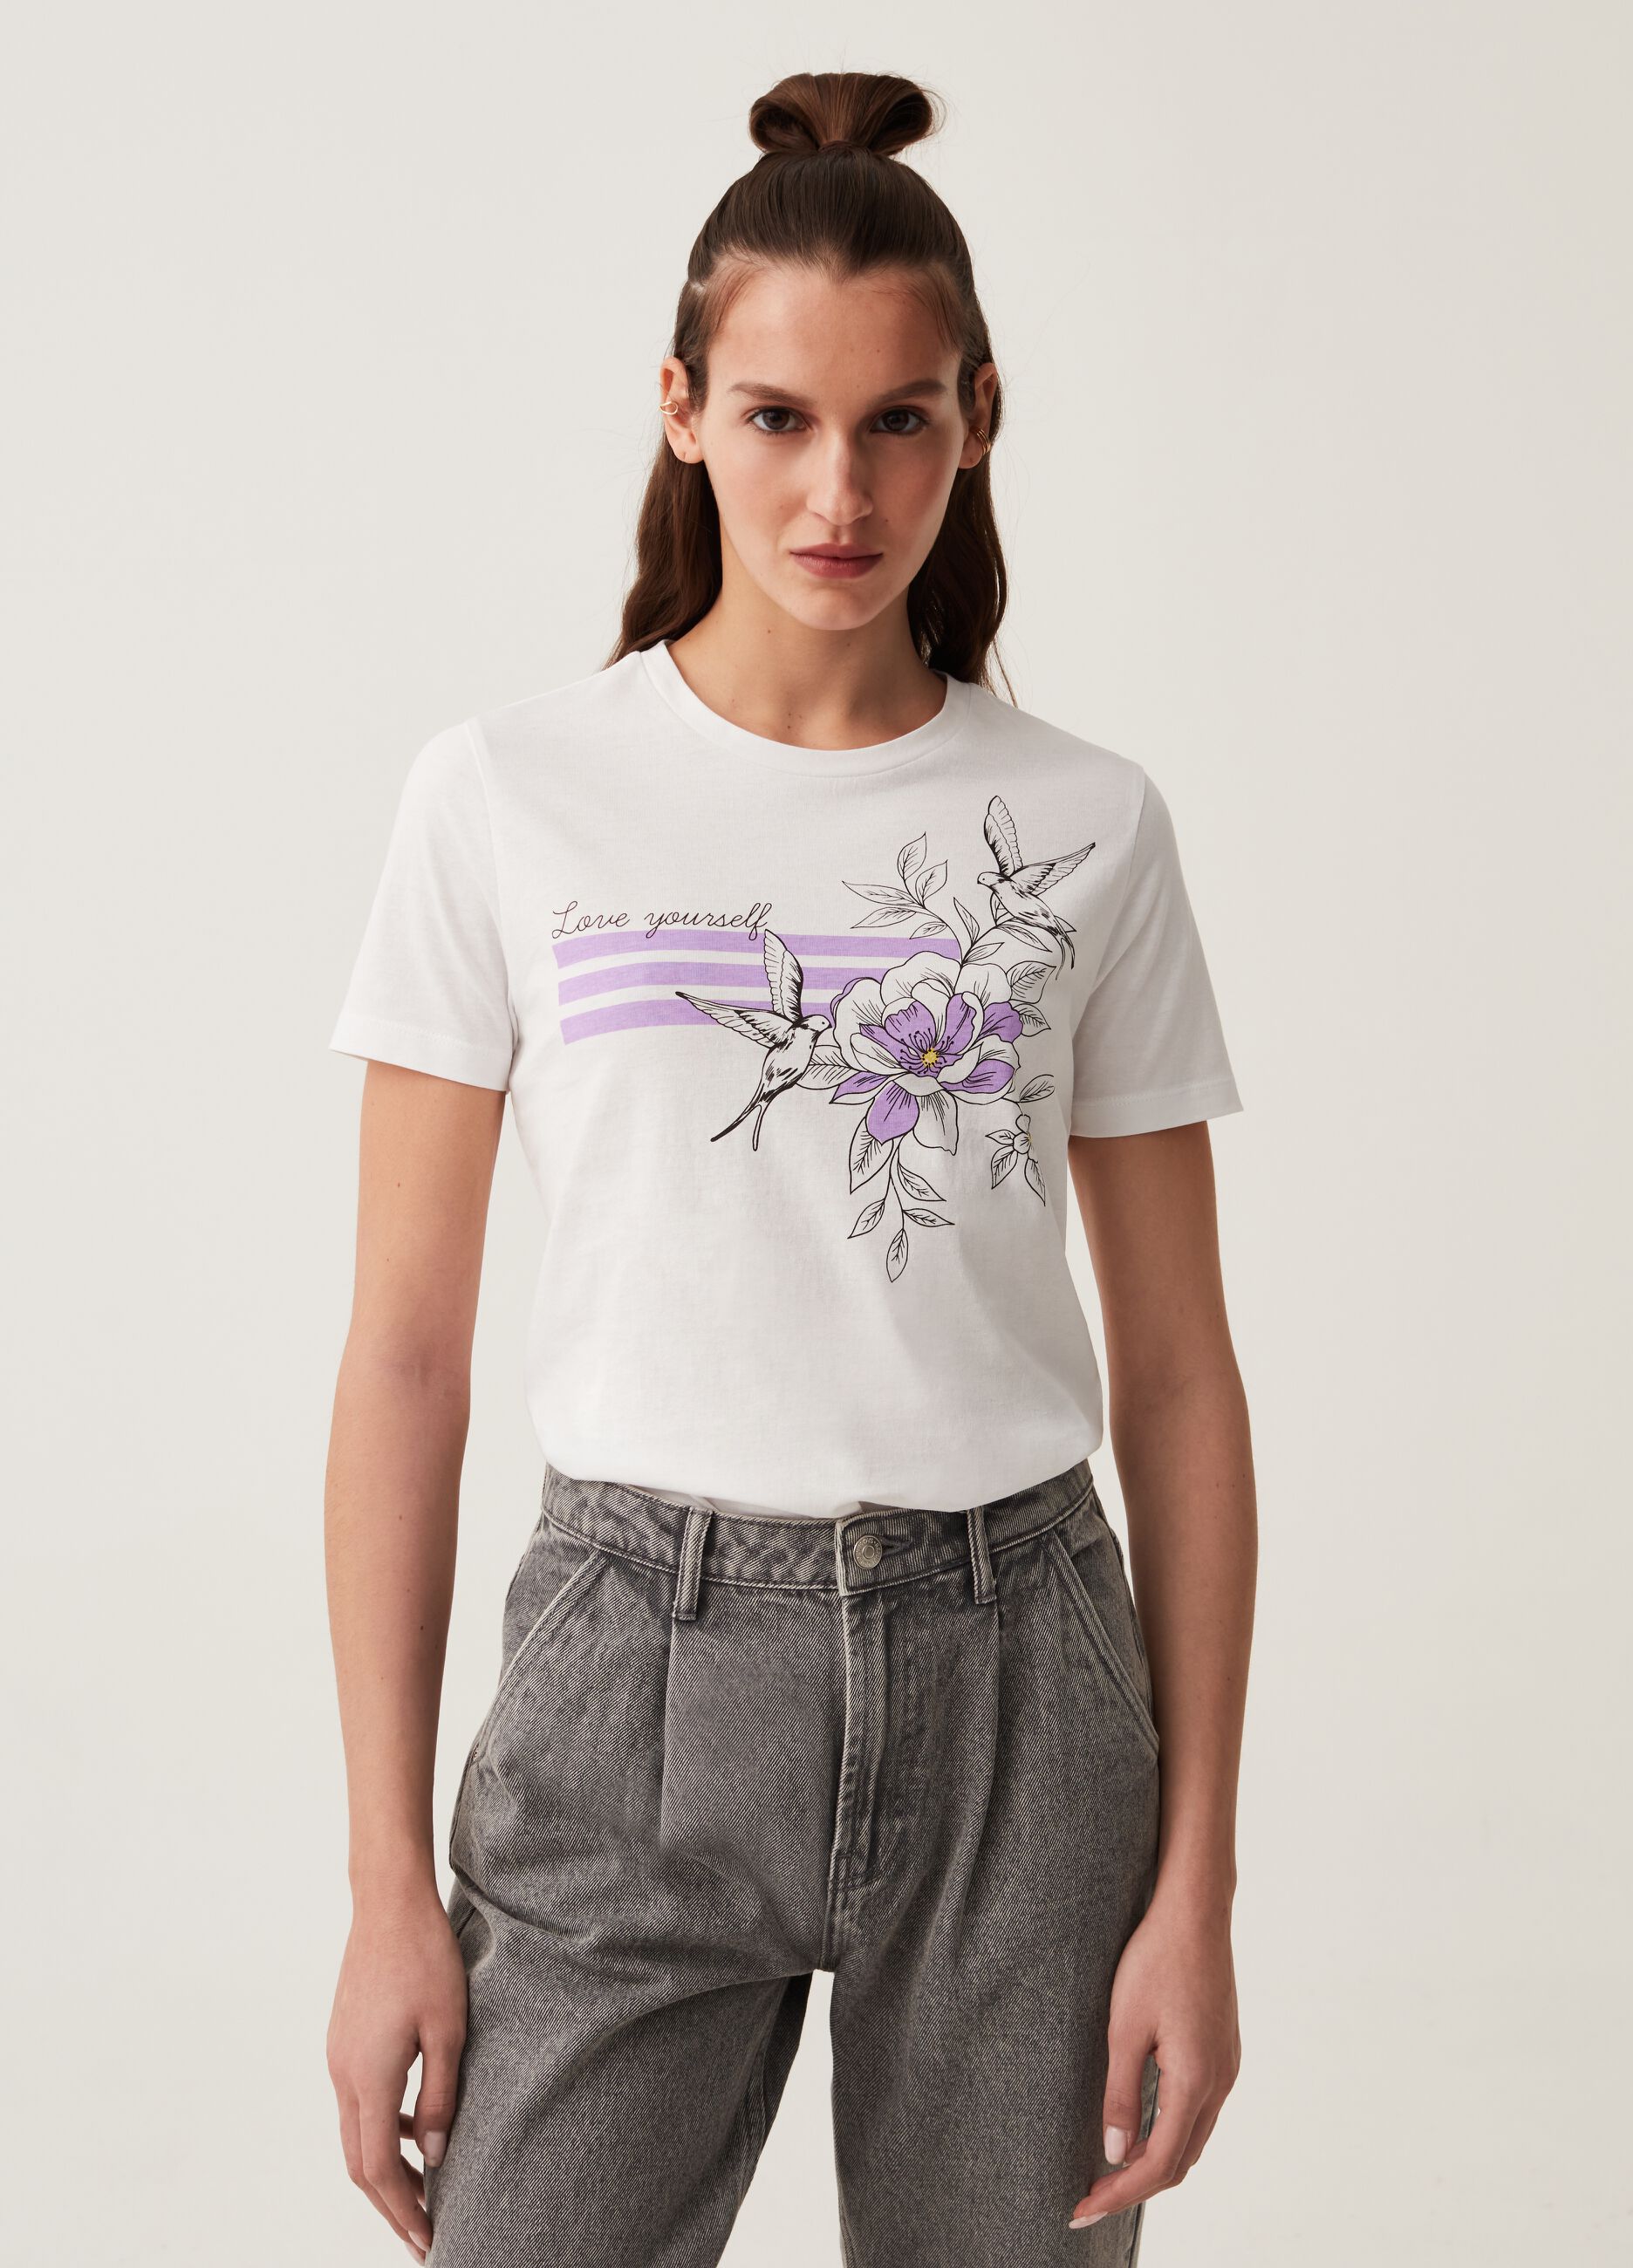 Cotton T-shirt with print